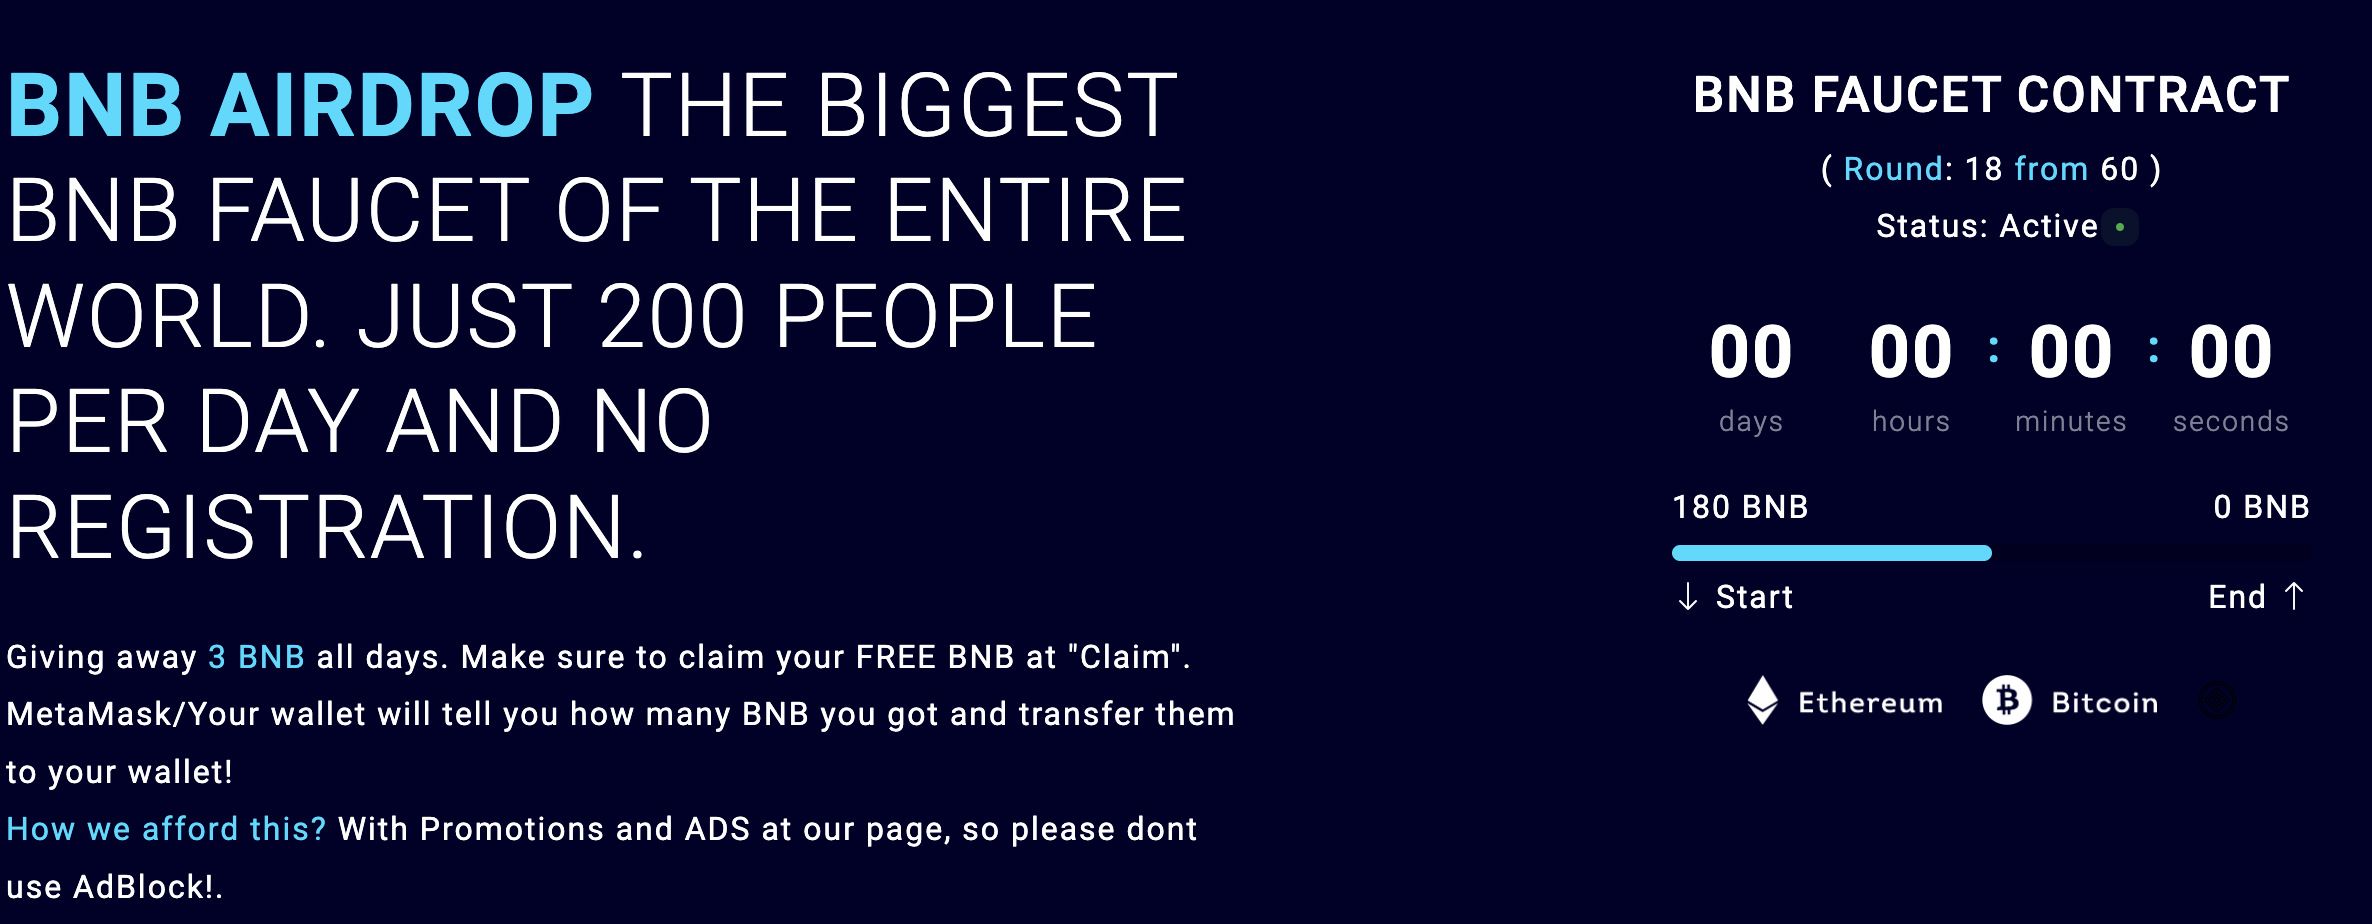 BNB Airdrop cover